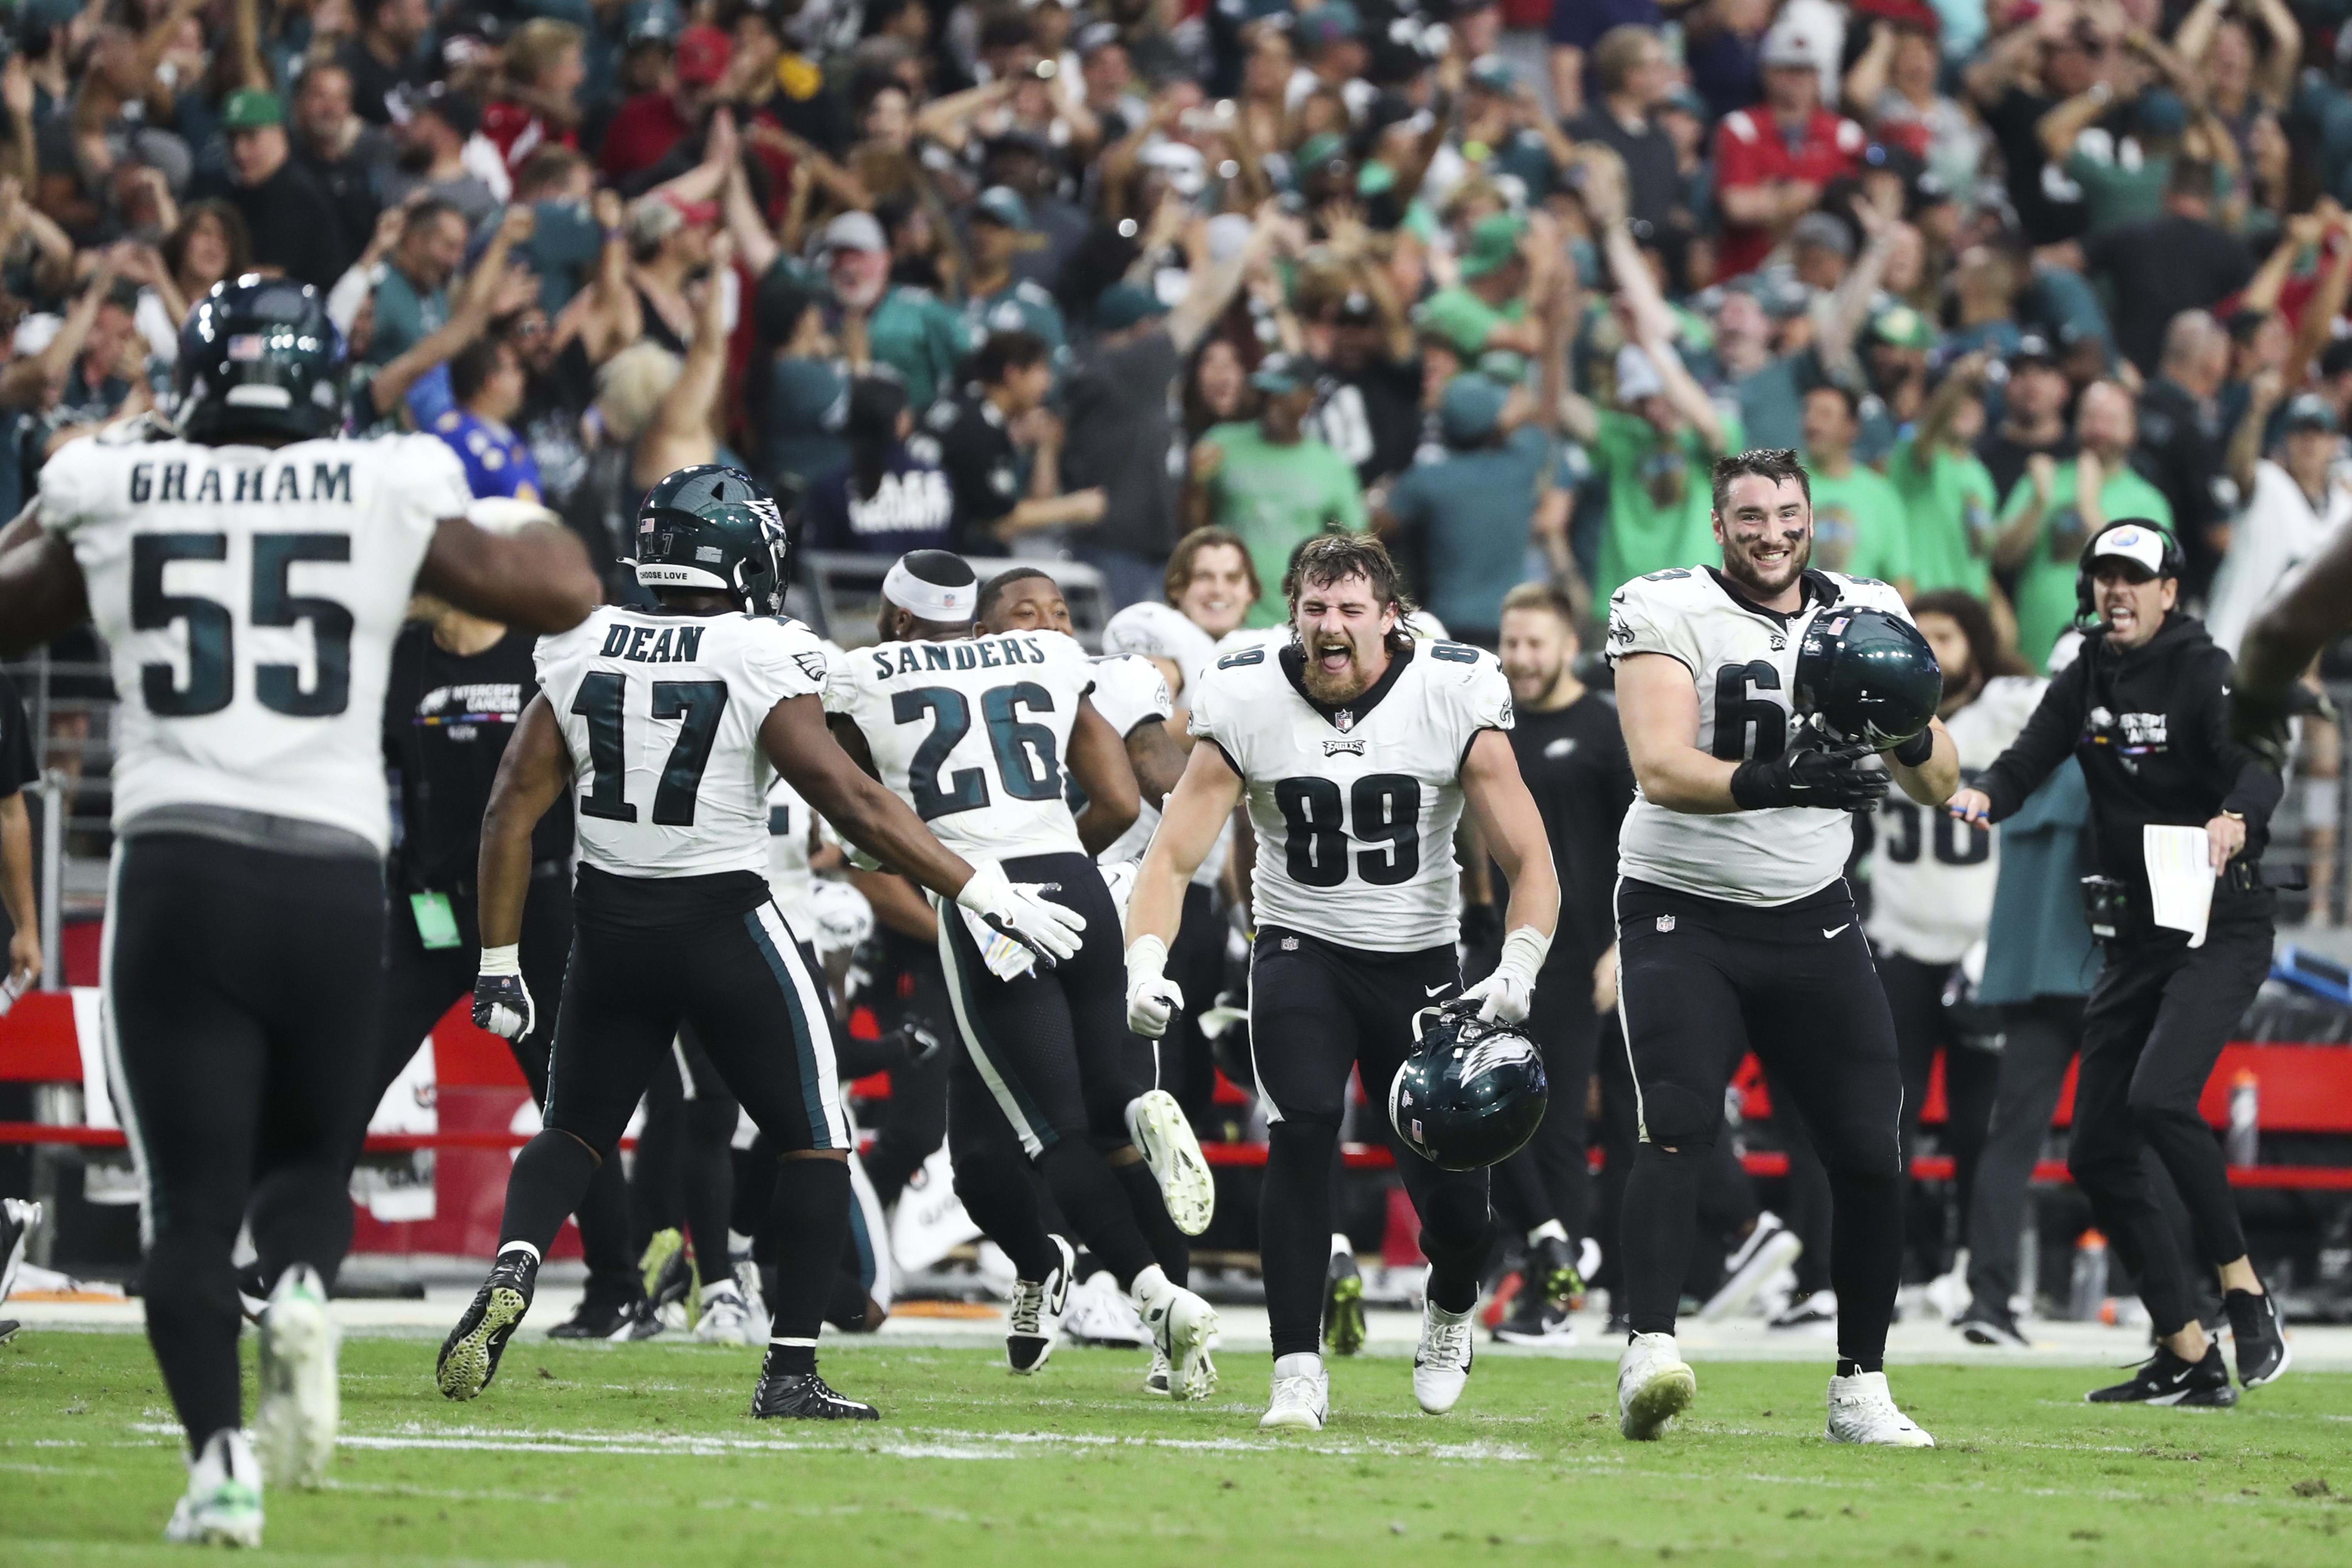 Eagles stay undefeated, hang on to beat Cardinals 20-17 – WUTR/WFXV –